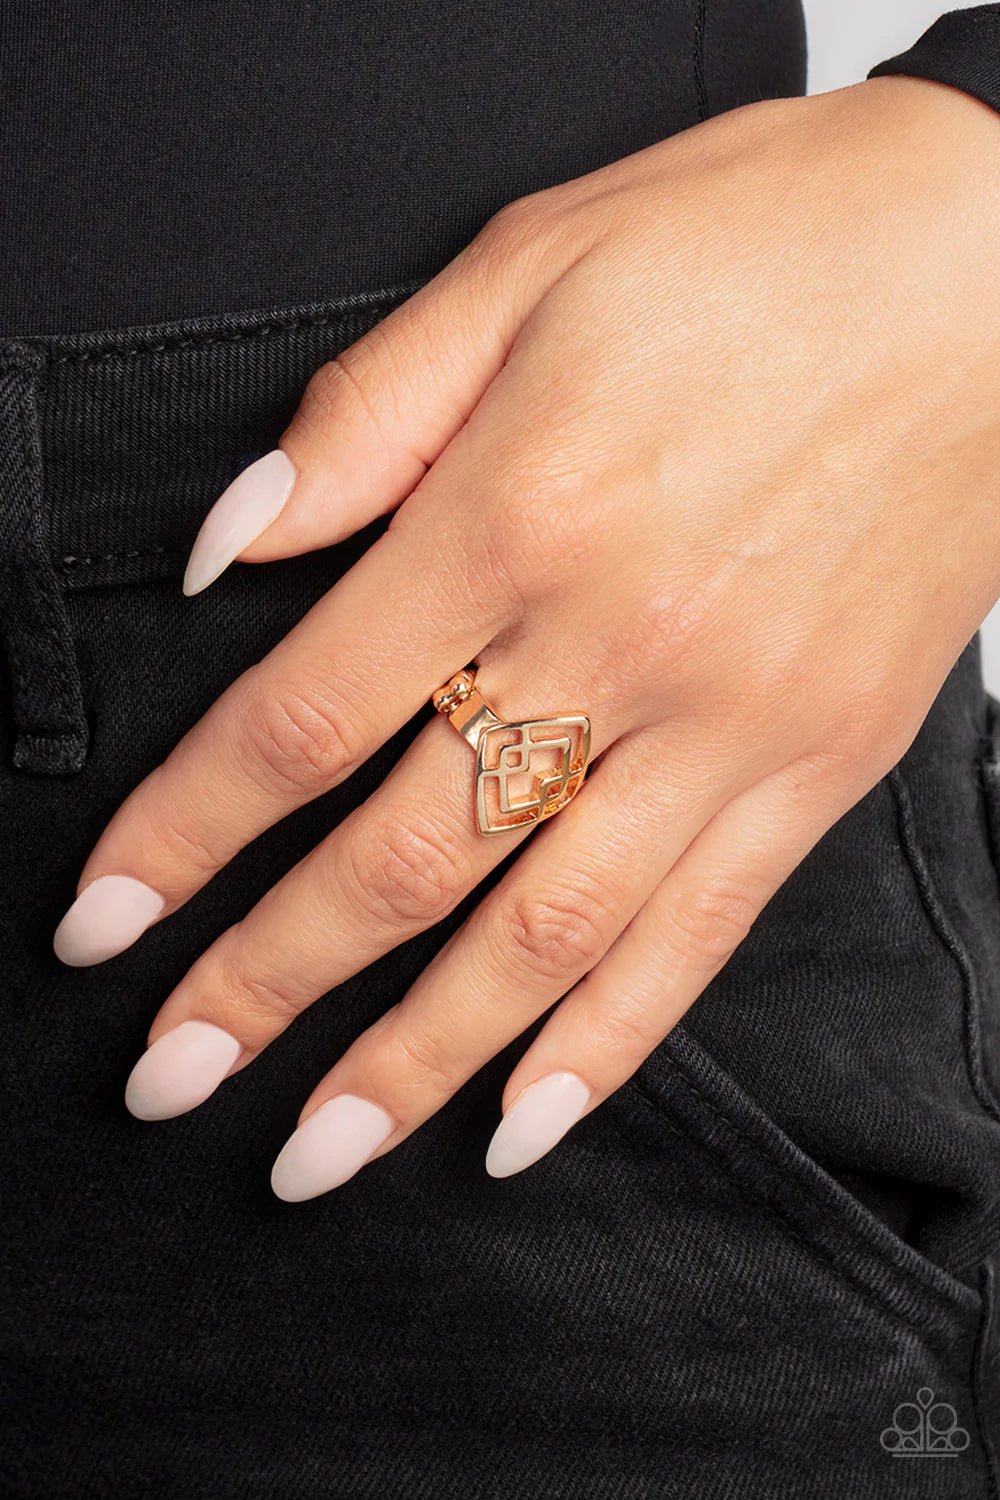 Paparazzi Accessories Diamond Duo - Gold Gold diamond silhouettes stack and interlock into an optical illusion atop the finger, resulting in an edgy geometric statement piece. Features a dainty stretchy band for a flexible fit. Sold as one individual ring